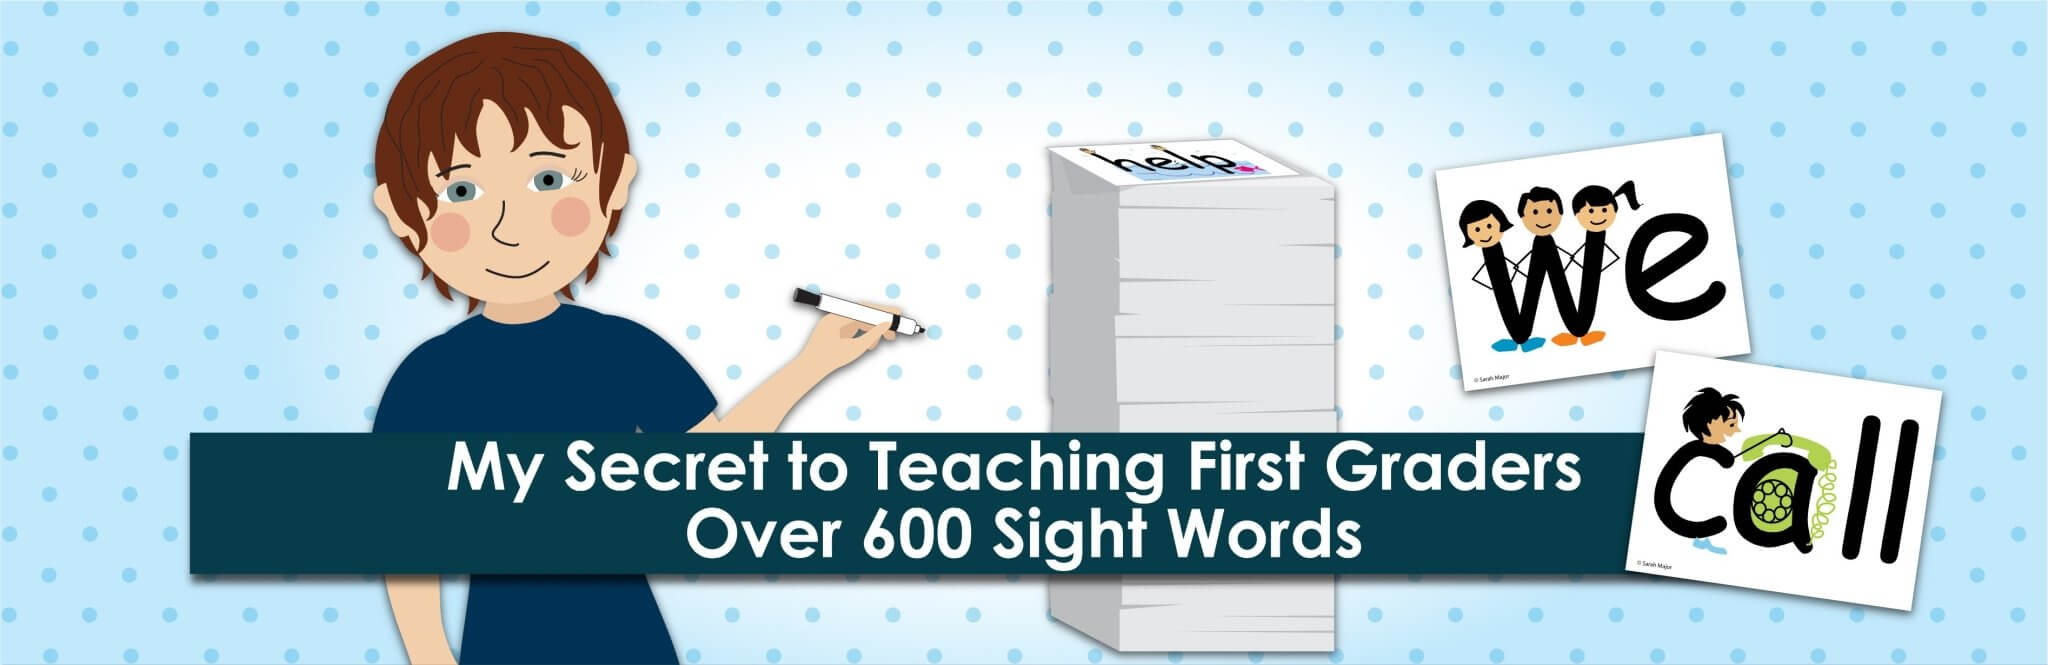 My Secret to Teaching First Graders Over 600 Sight Words